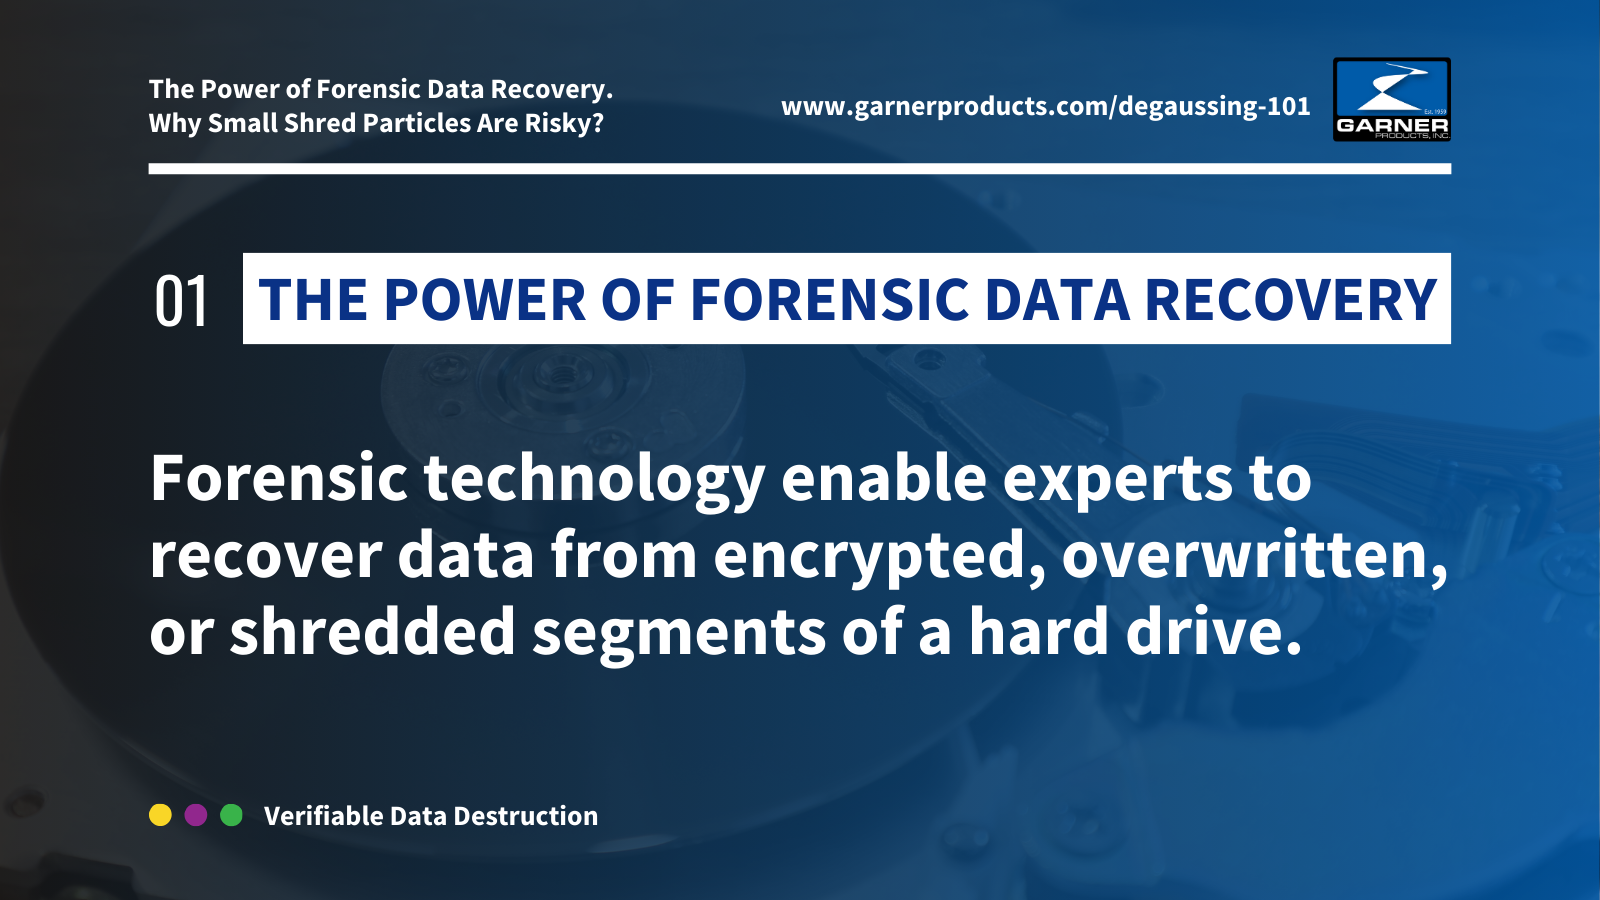 The power of forensic data recovery and why small shred particles are risky